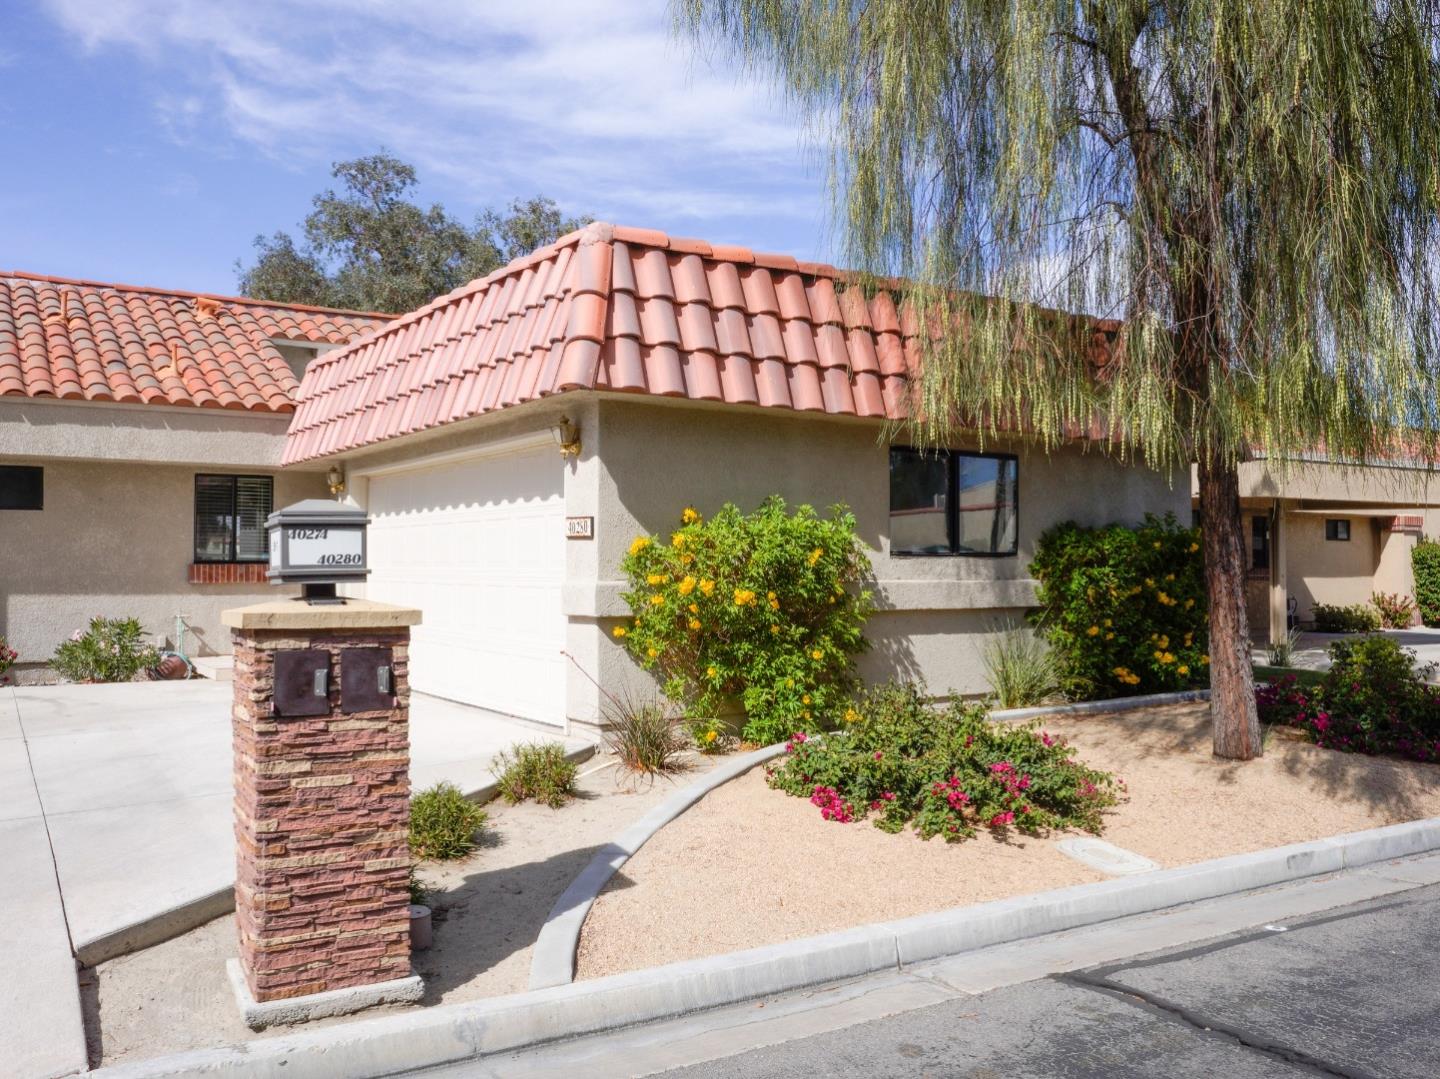 Photo of 40280 Bay Hill Wy in Palm Desert, CA